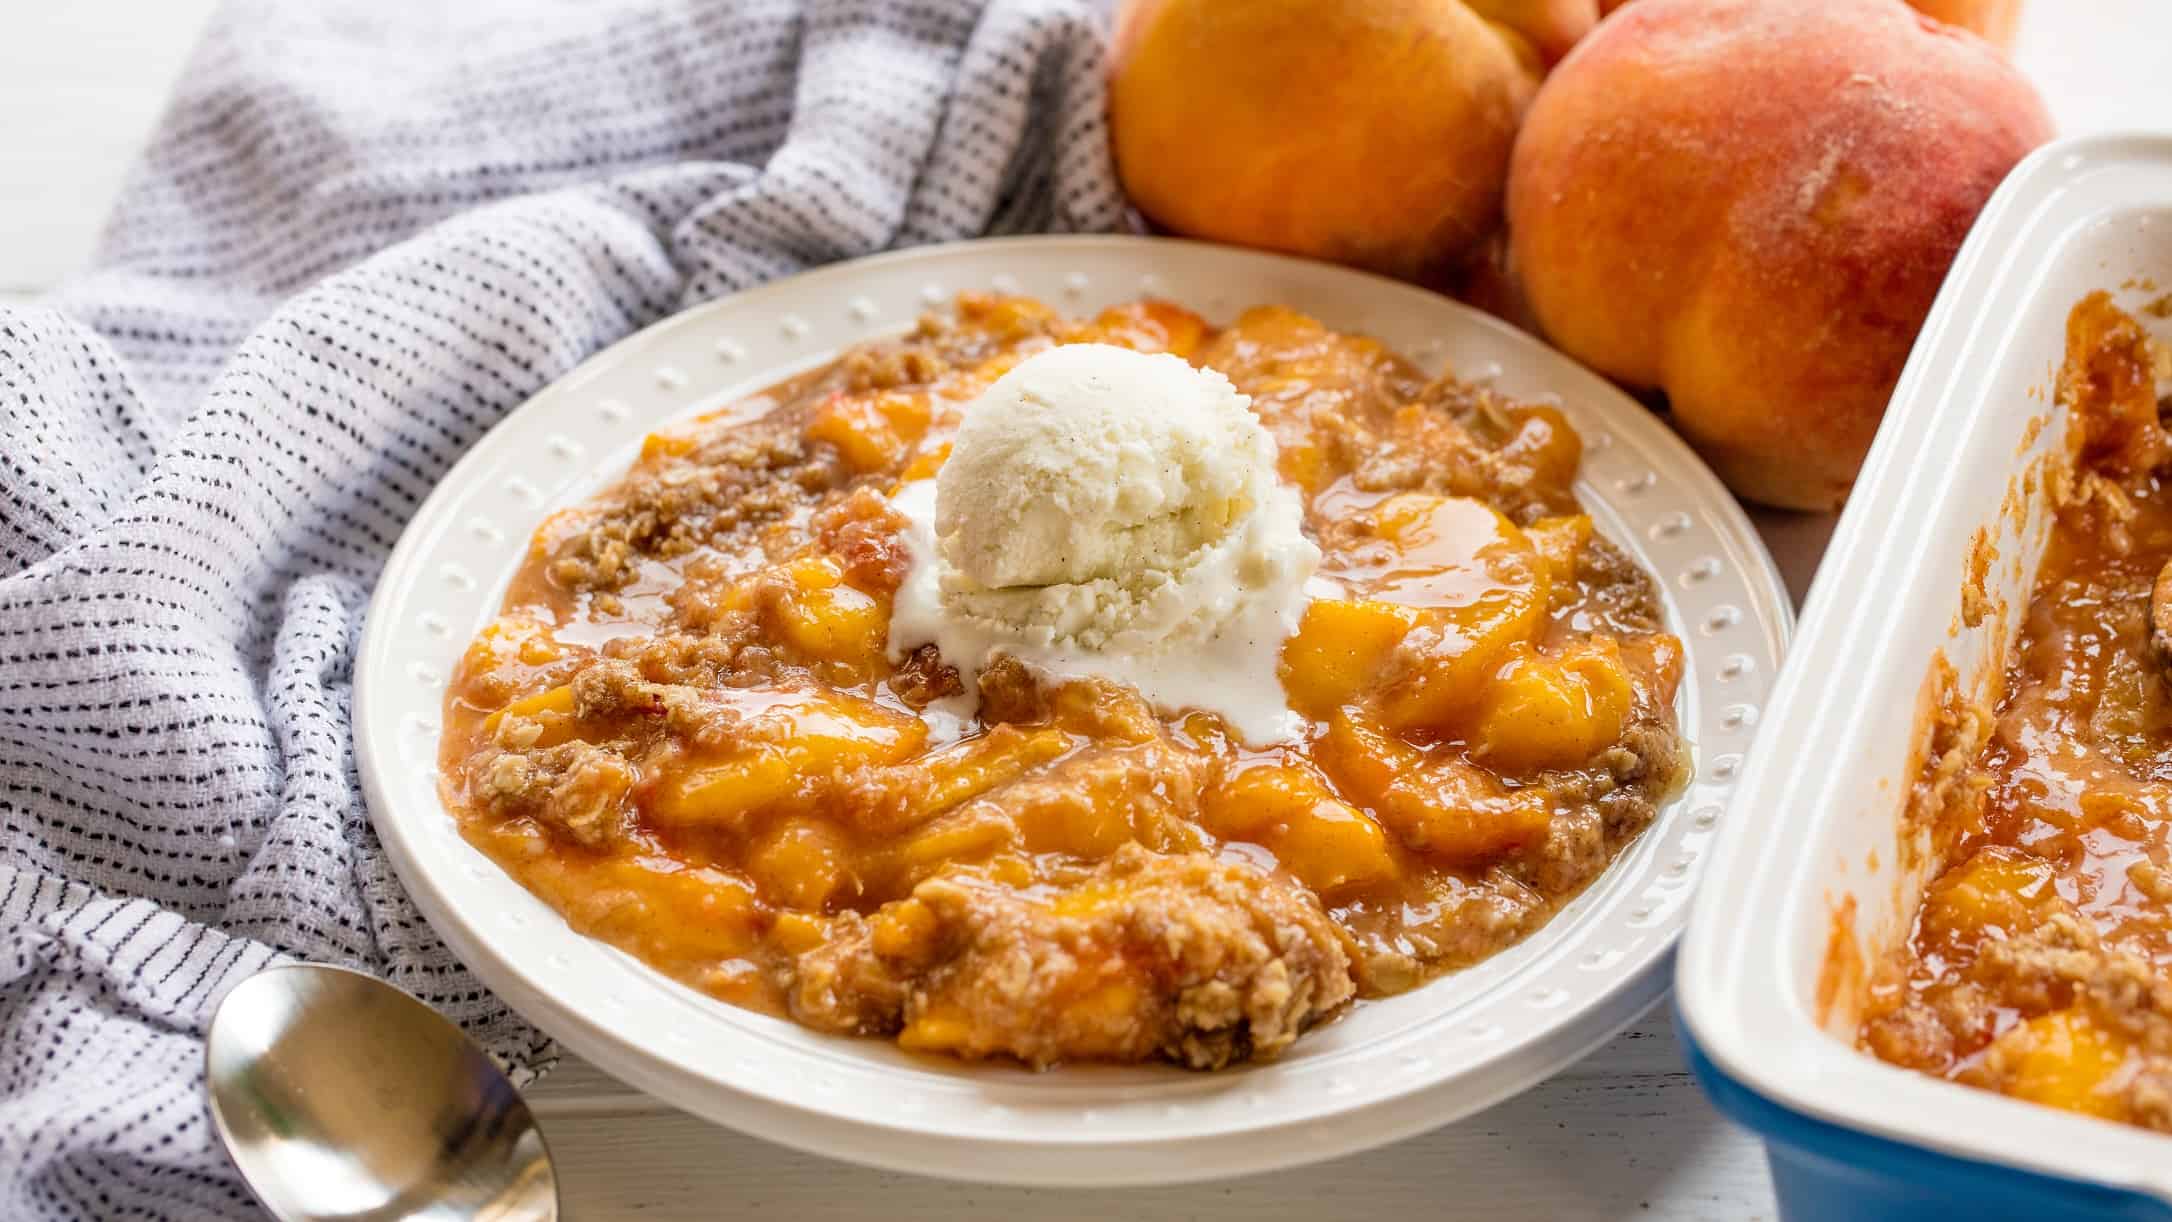 Peach crisp in a bowl with a scoop of ice cream